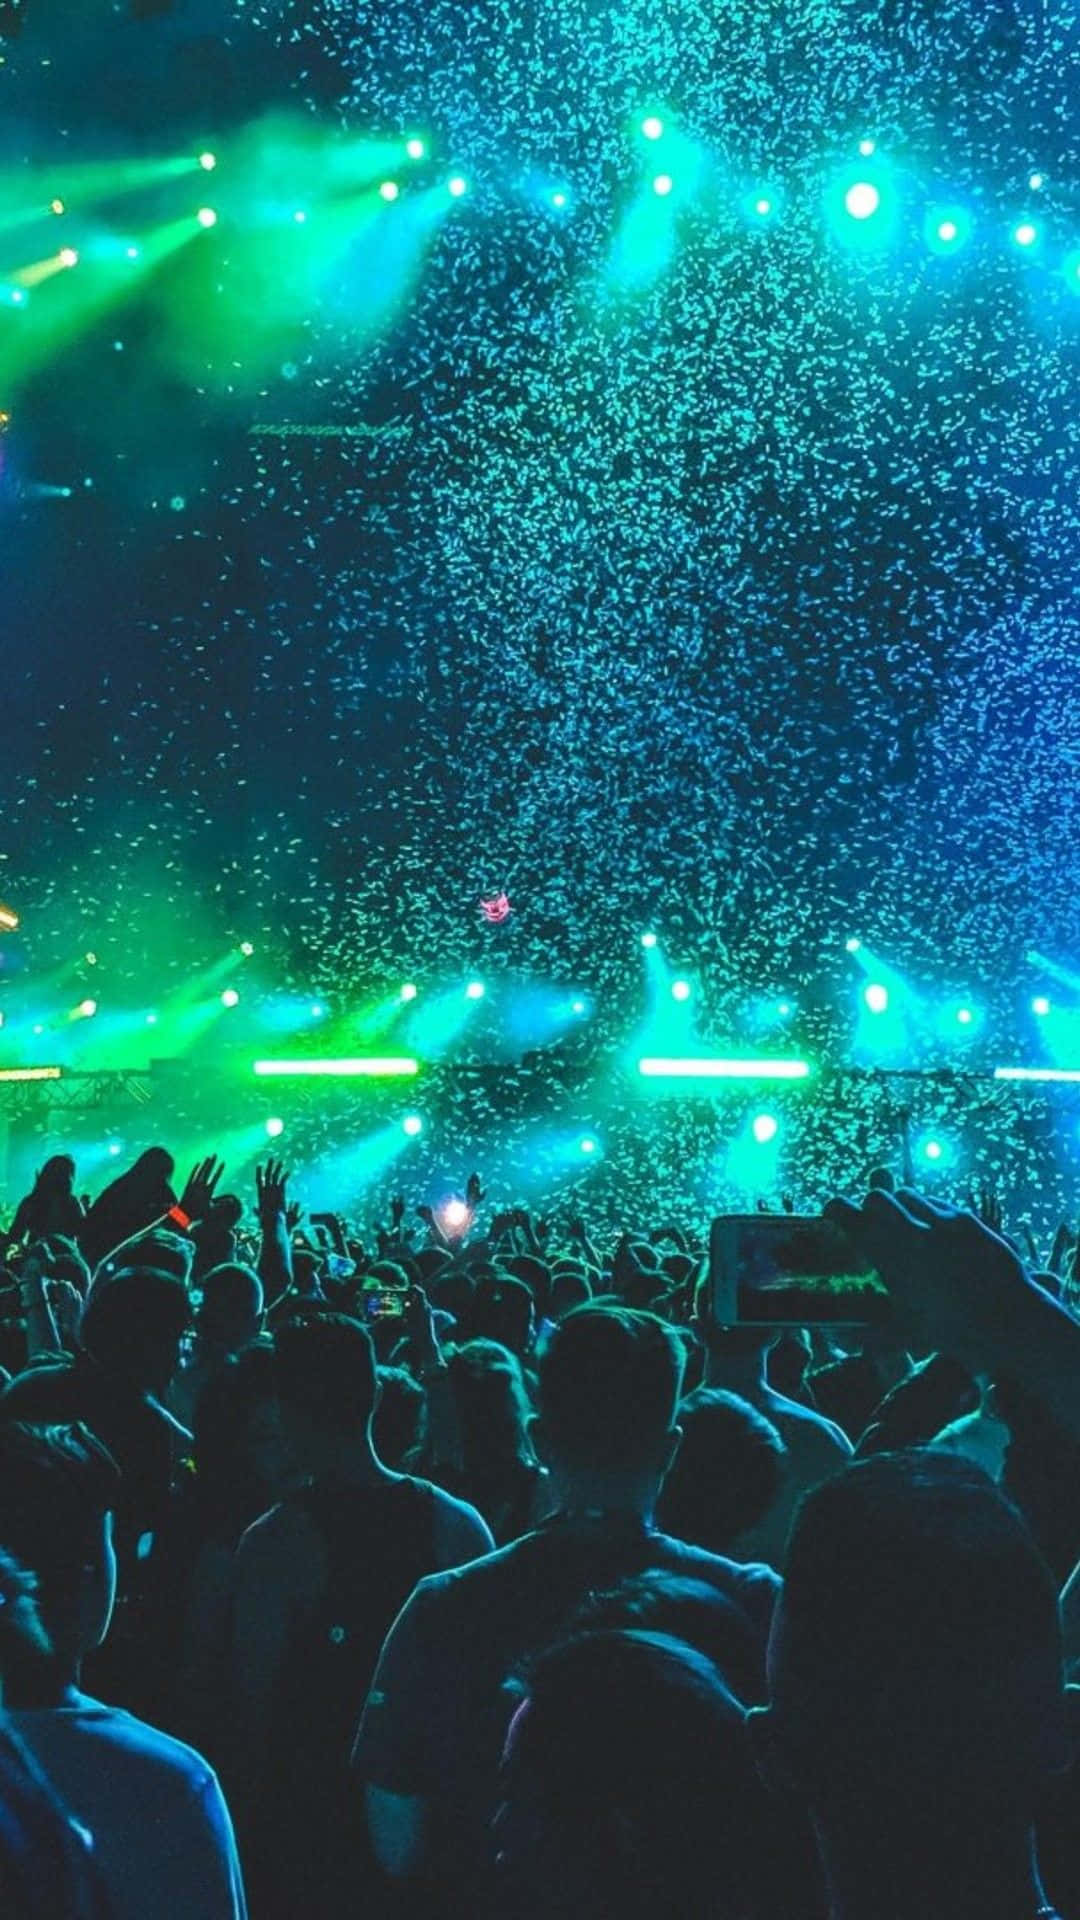 A Crowd At A Concert With Green And Blue Lights